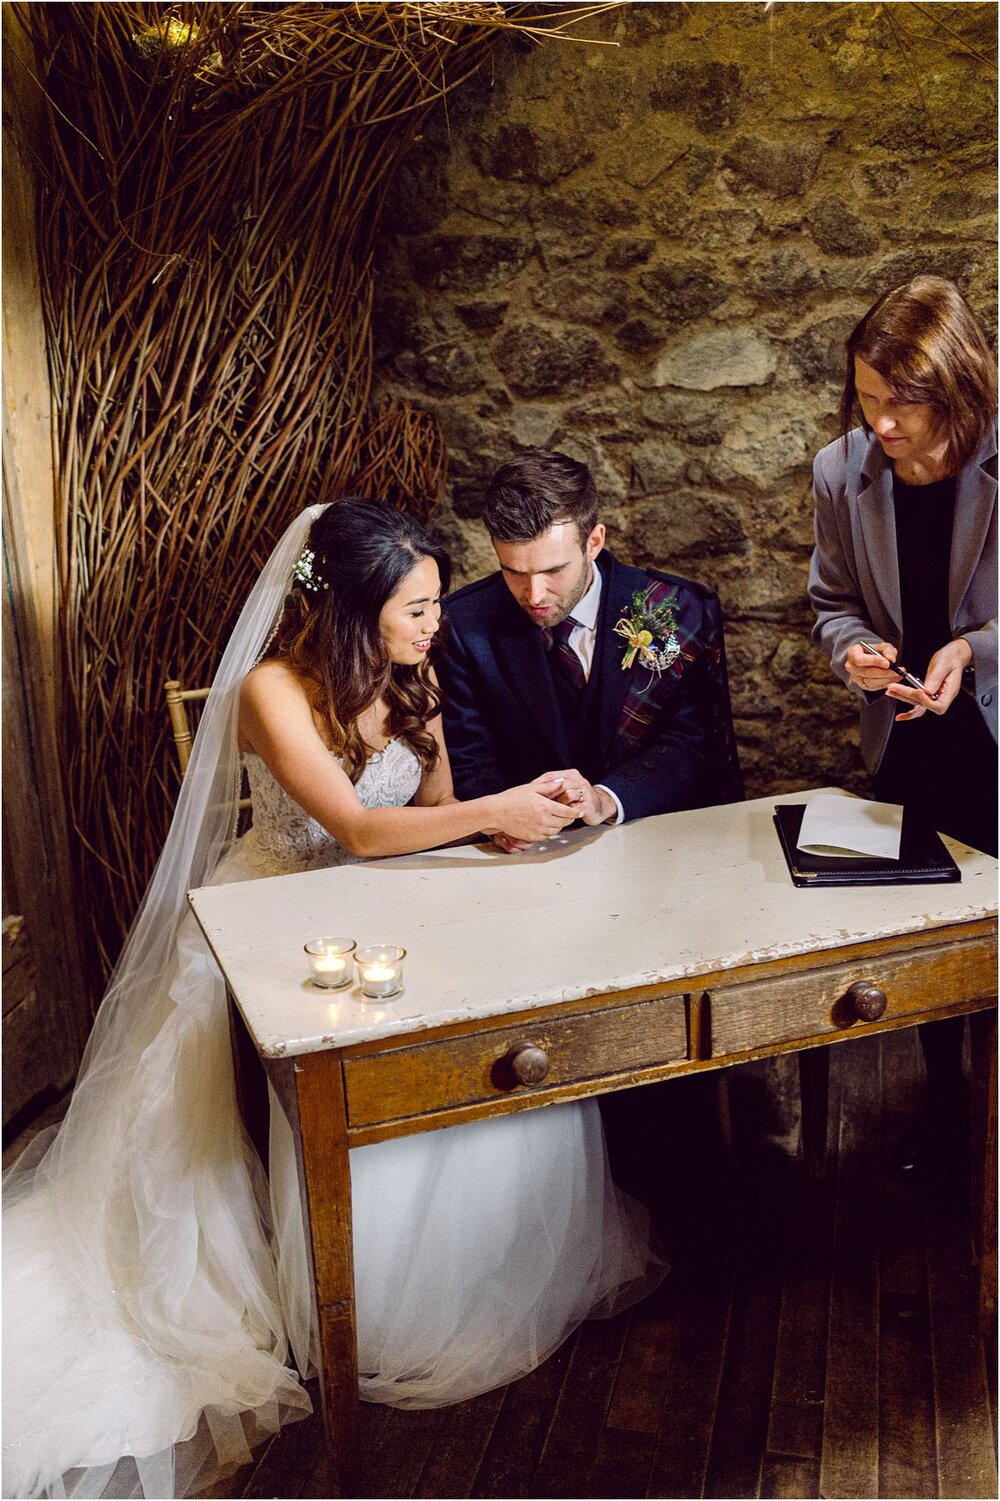  Springtime wedding at The Byre At Inchyra in Perthshire in Scotland by Crofts & Kowalczyk Photography 